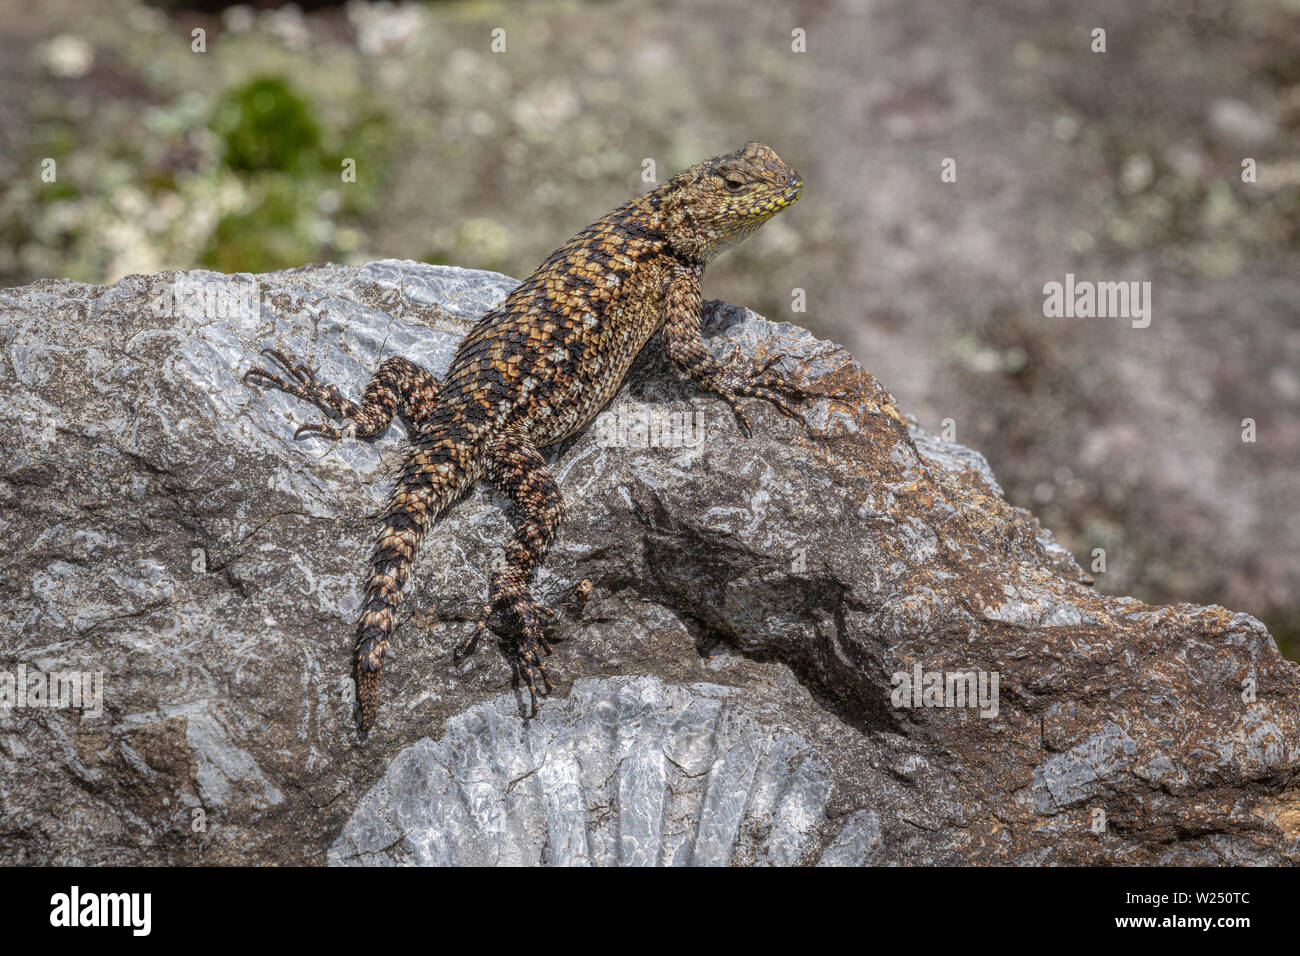 Green Spiny Lizards can be bright green or as dark as slate or black. Most become this darker color as they try to absorb more sunlight. Stock Photo